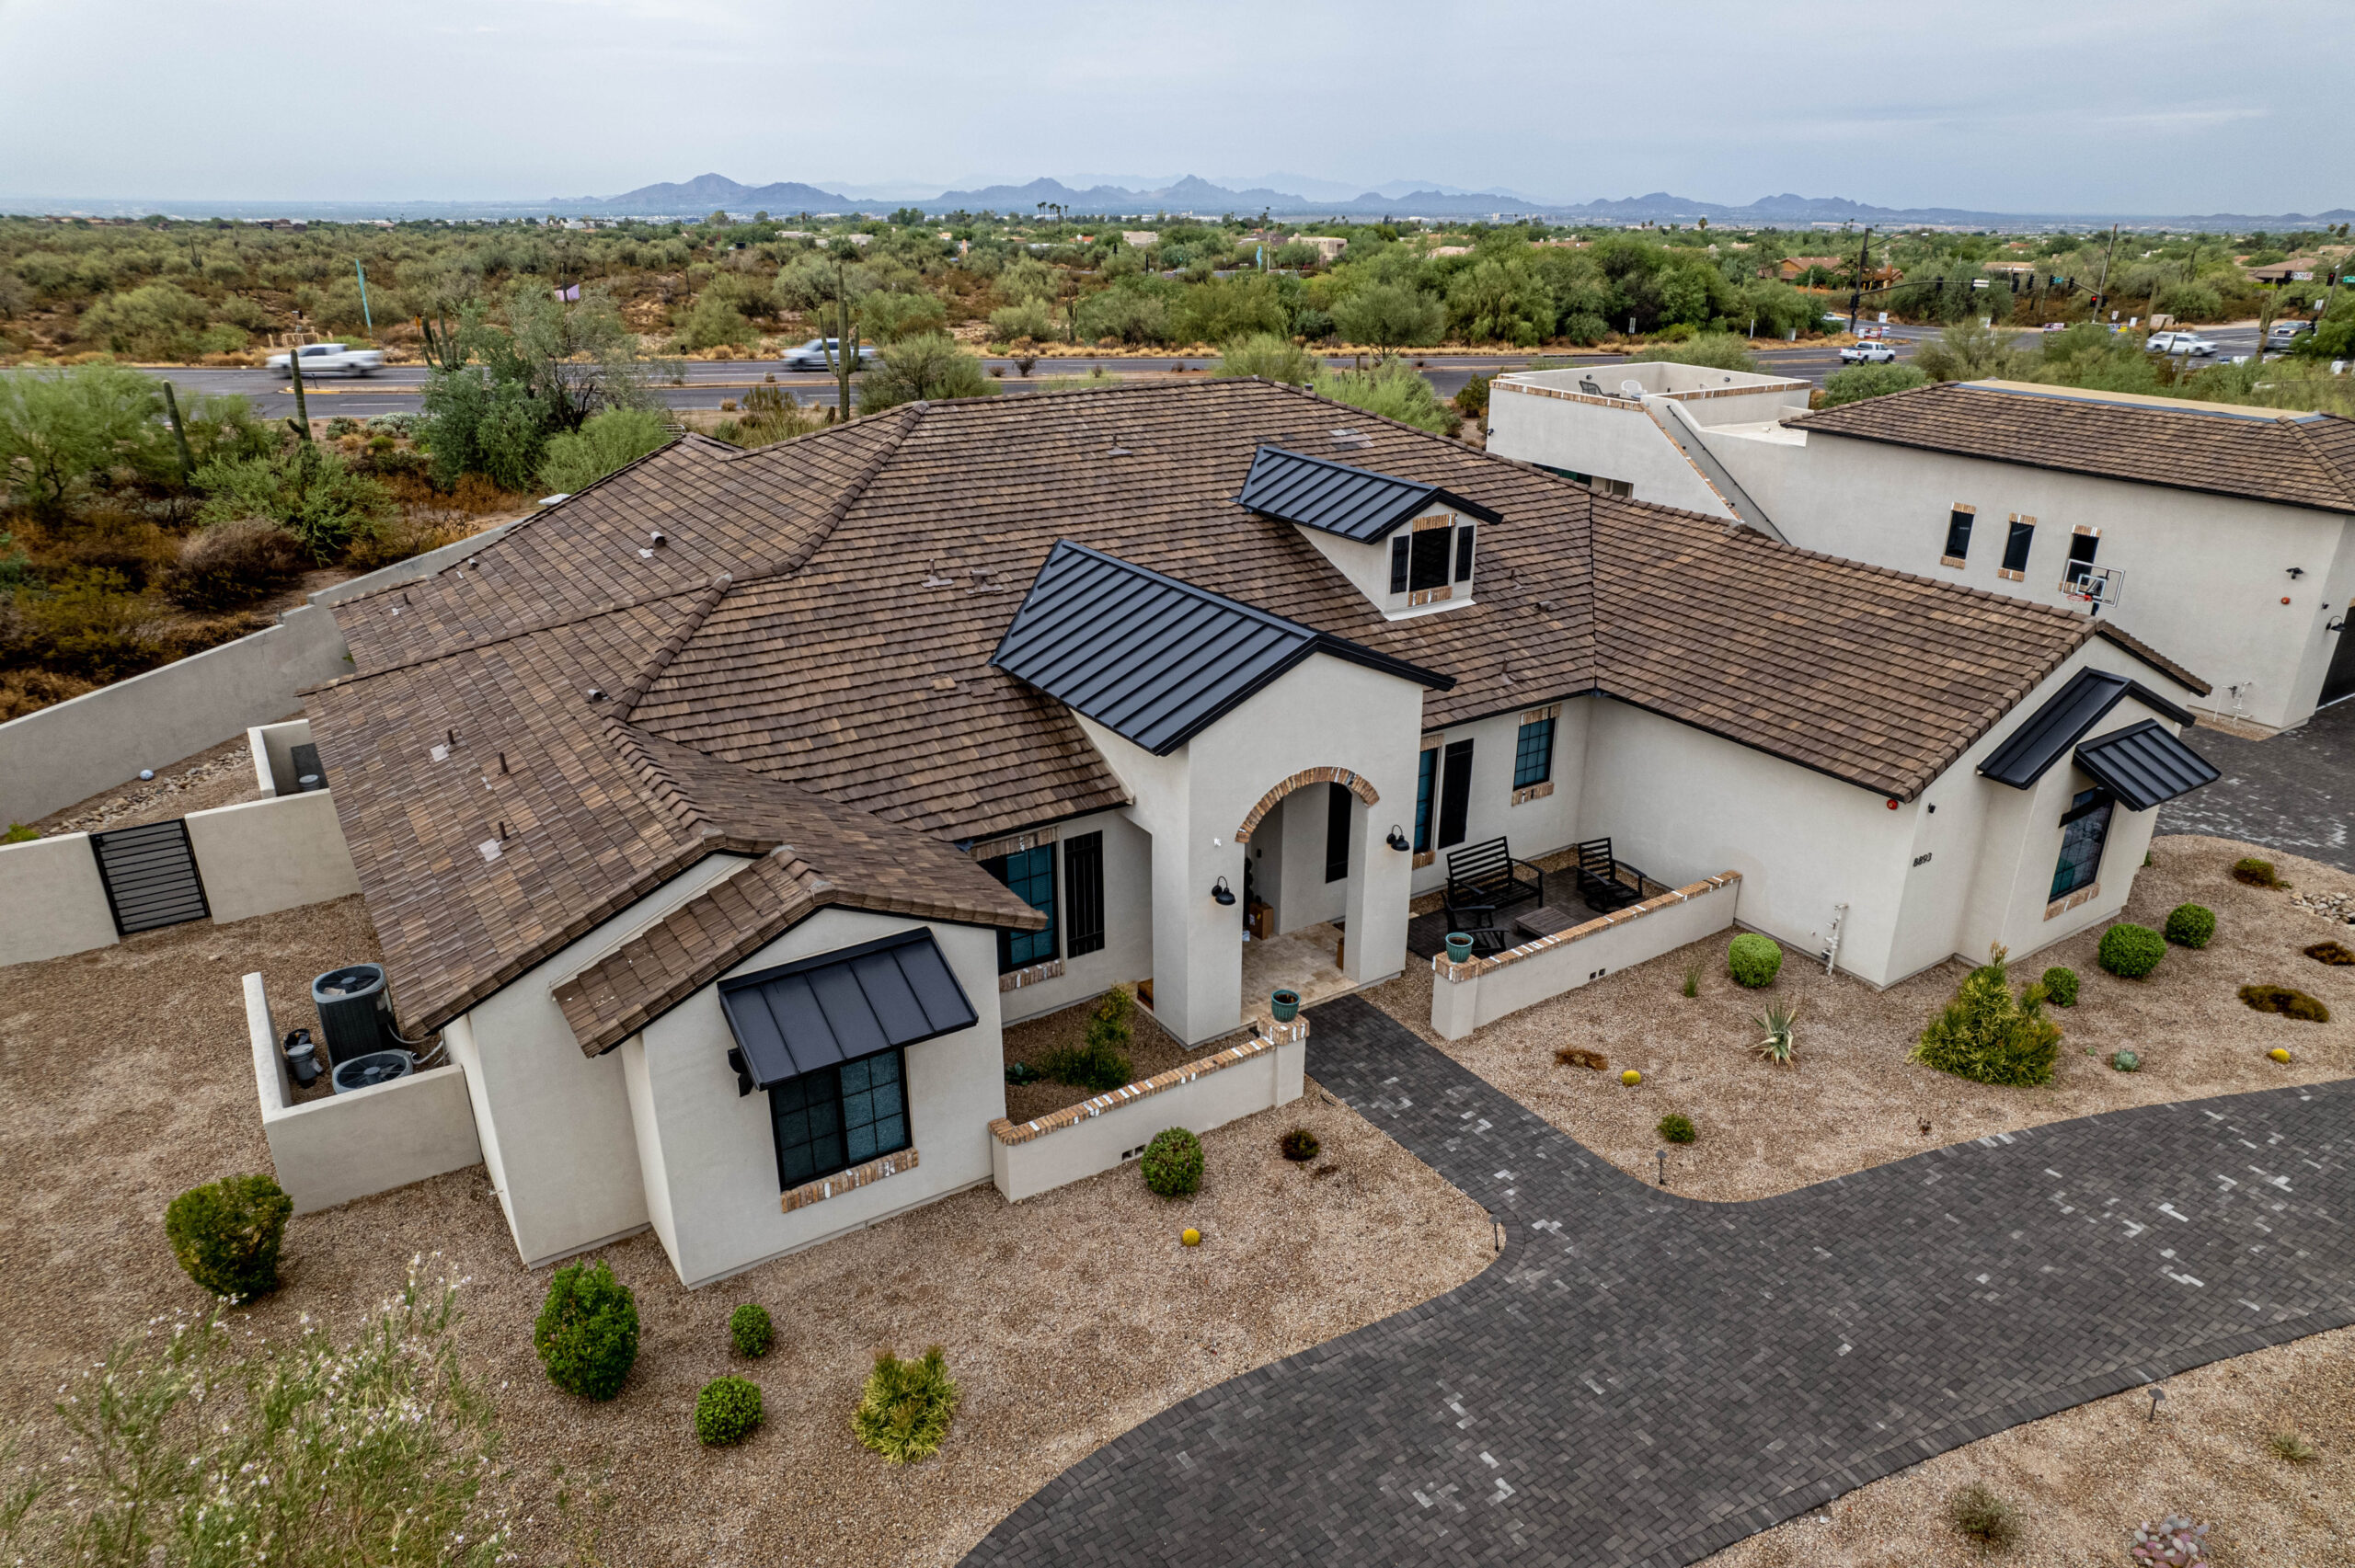 Bird's-eye view of Whisper Rock homes, accentuating the beauty of tiled roofs.